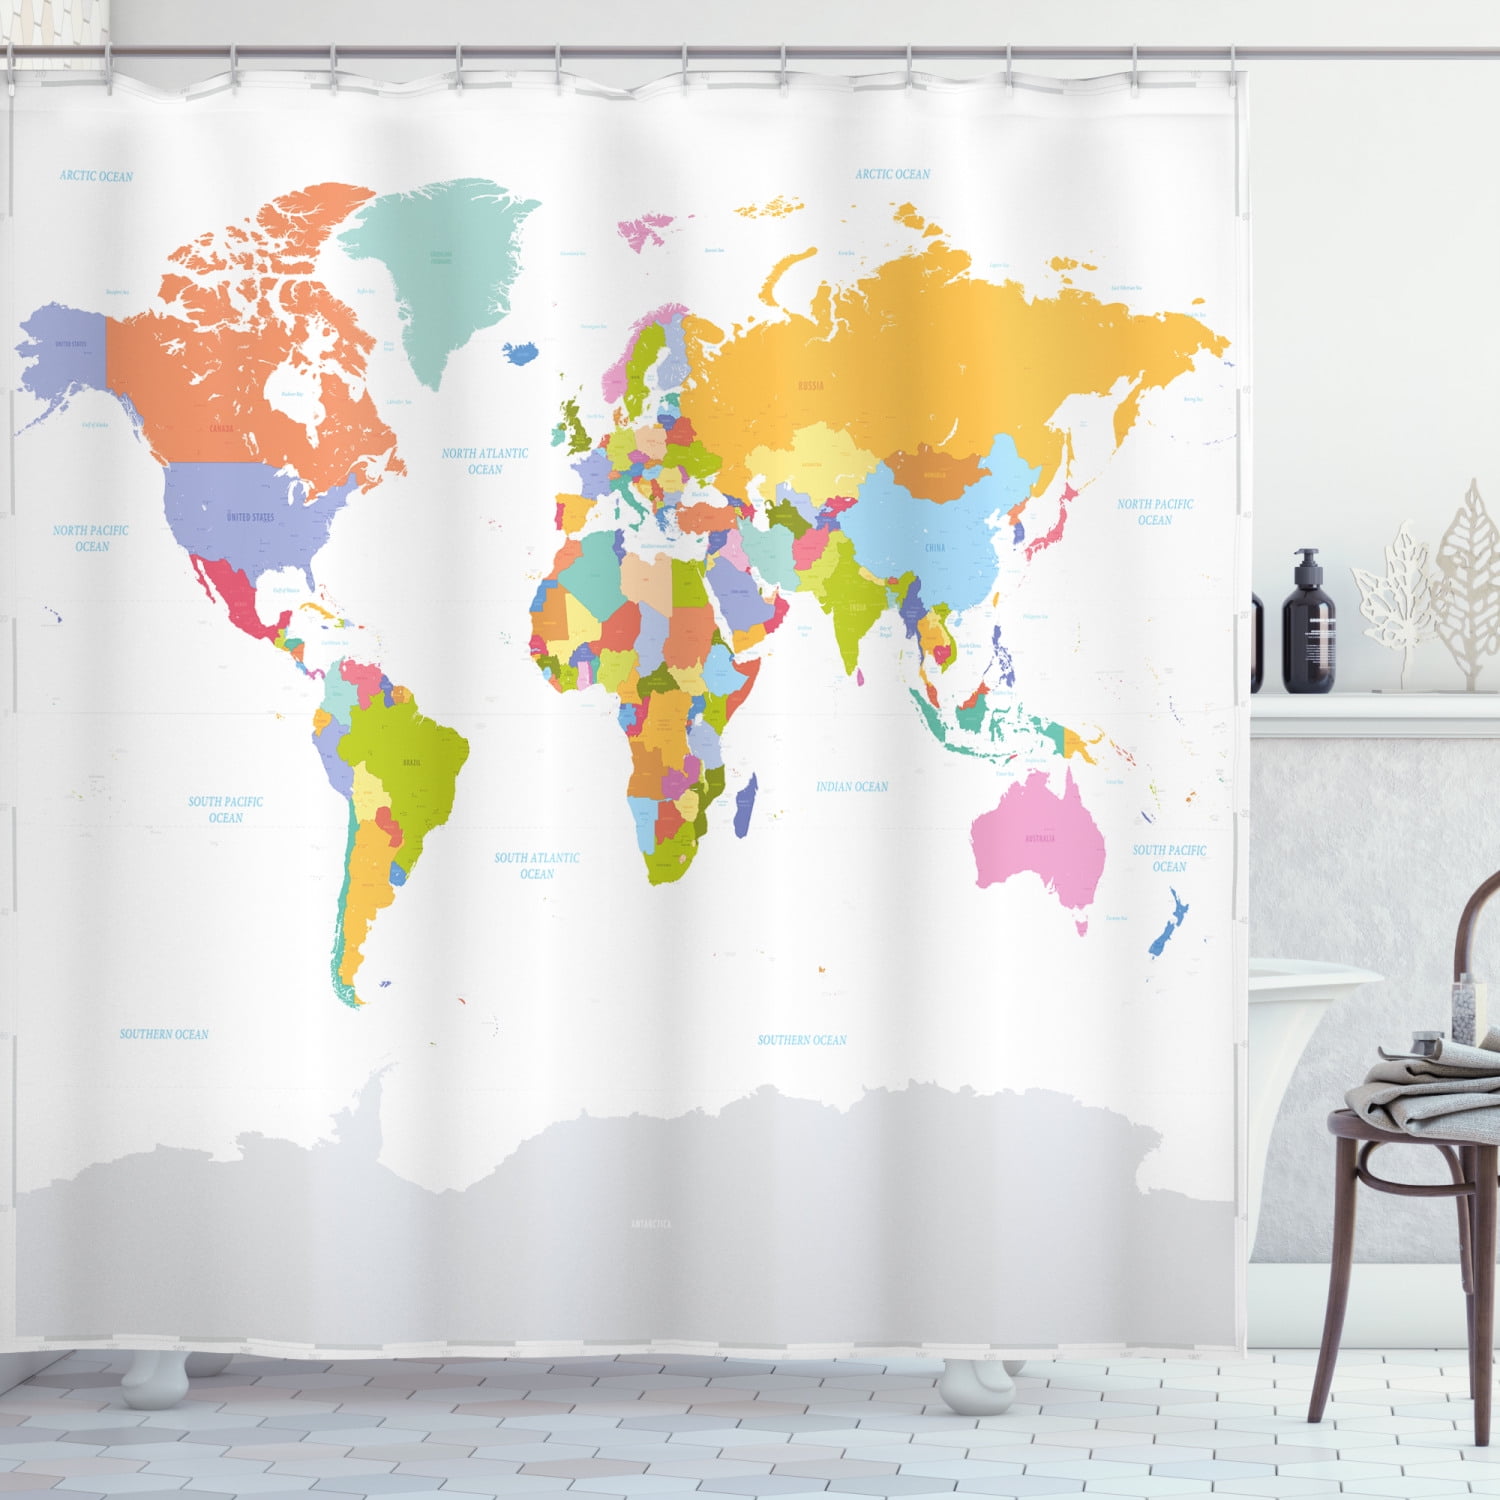 Details about   Shower Curtain Map of the World Detailed Major Cities Fabric Large Home Decor 